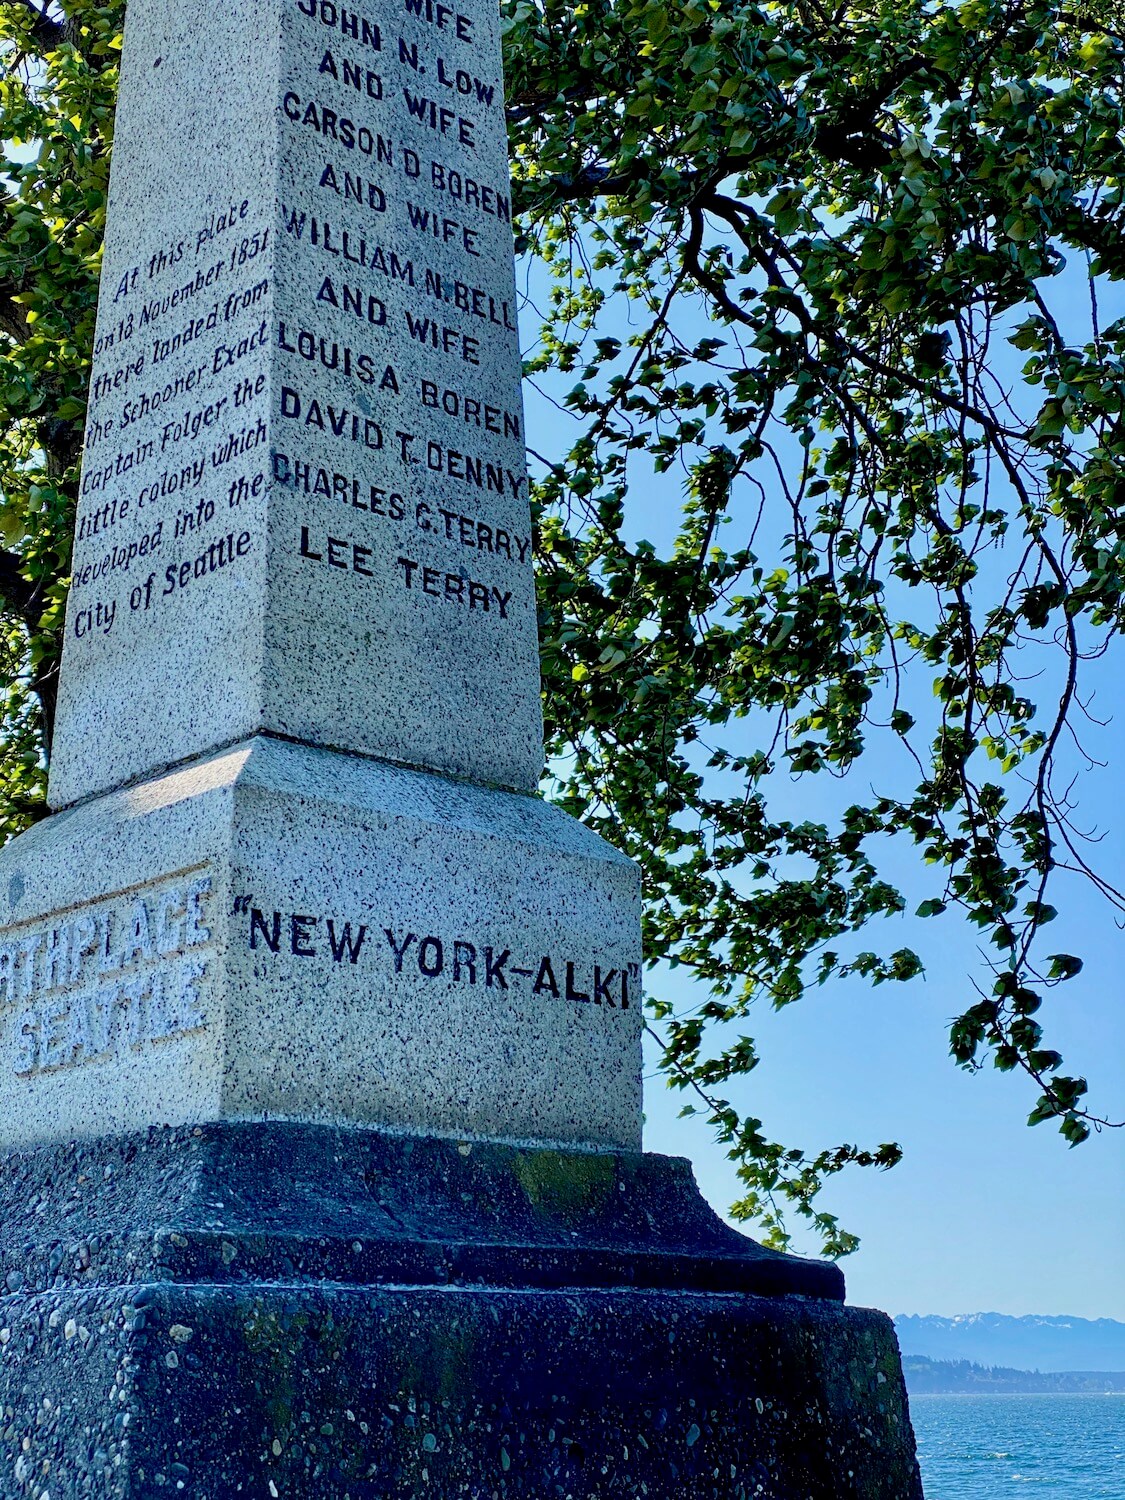 This monument commemorates the birthplace of Seattle and is a granite obelisk shaped tower with black engraved letters that describe how the settlers arrived on this land in 1851. There are leaves of a tree in the background along with the rolling blue waters of the Puget Sound. This is on Alki Beach in West Seattle.